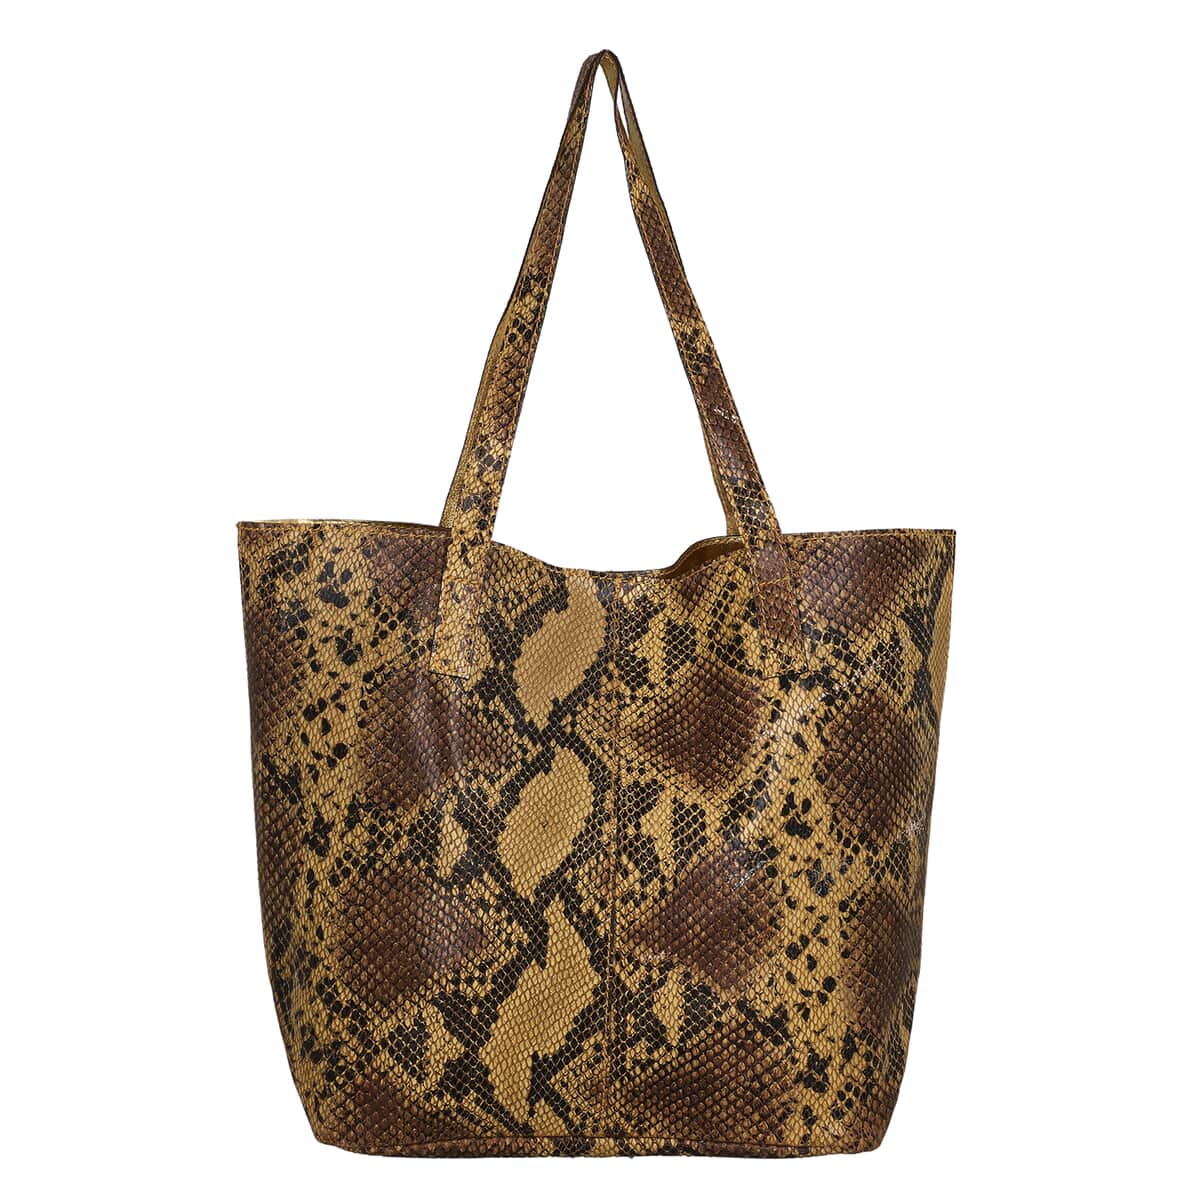 Black and Yellow Snake Foil Print 100% Genuine Leather Tote Bag (14.56"x 3.74" x 8.66") image number 0